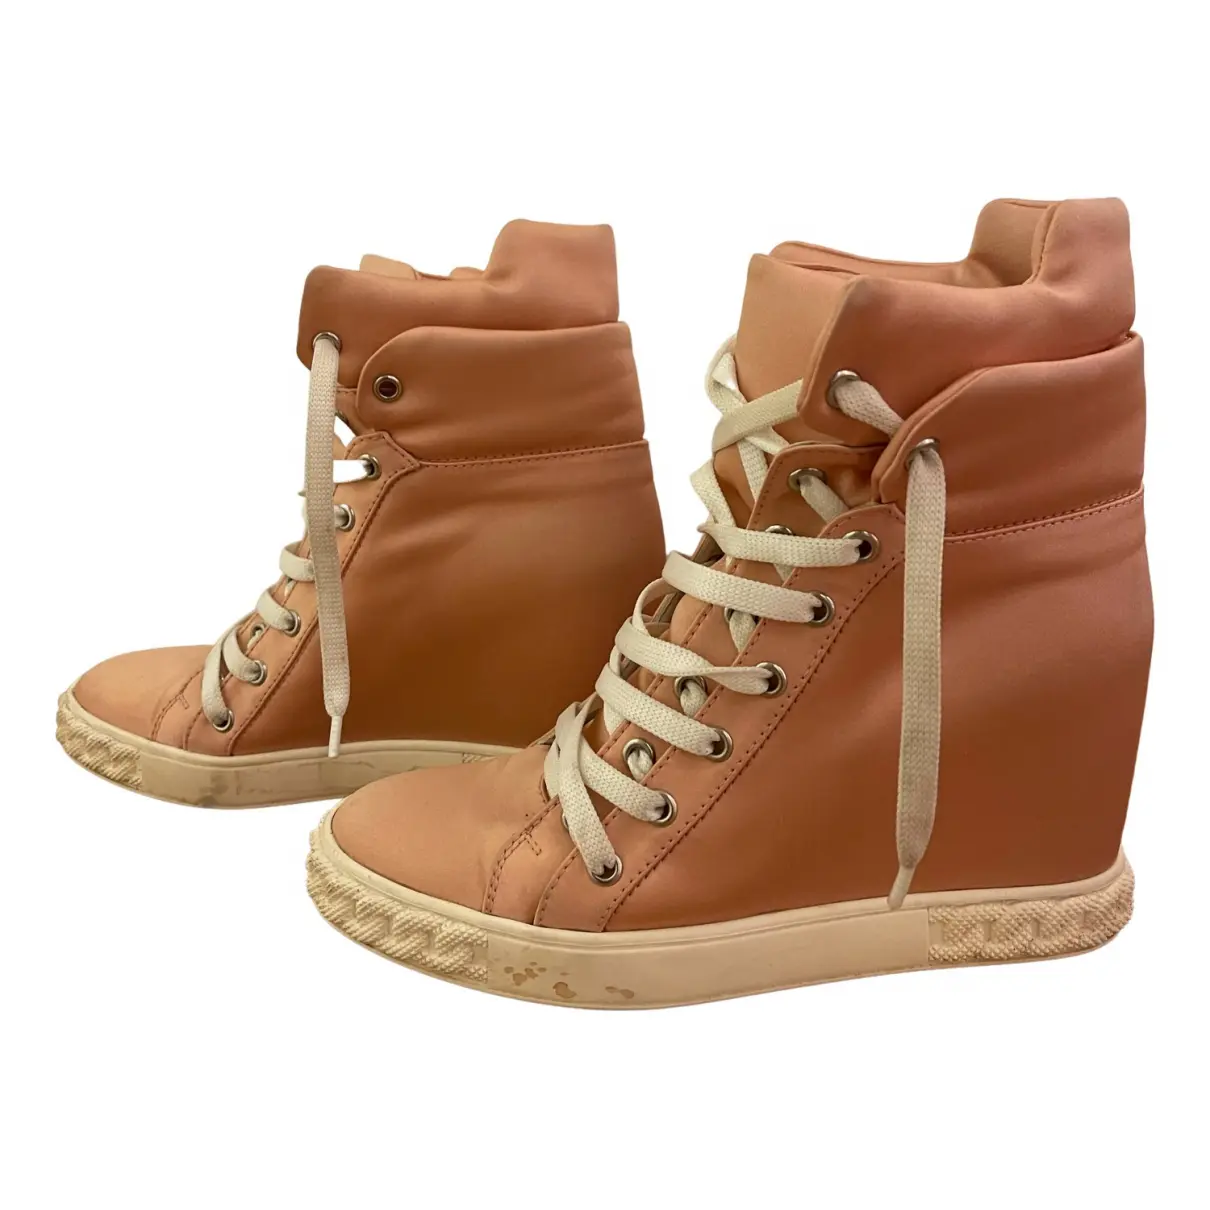 Cloth lace up boots Casadei